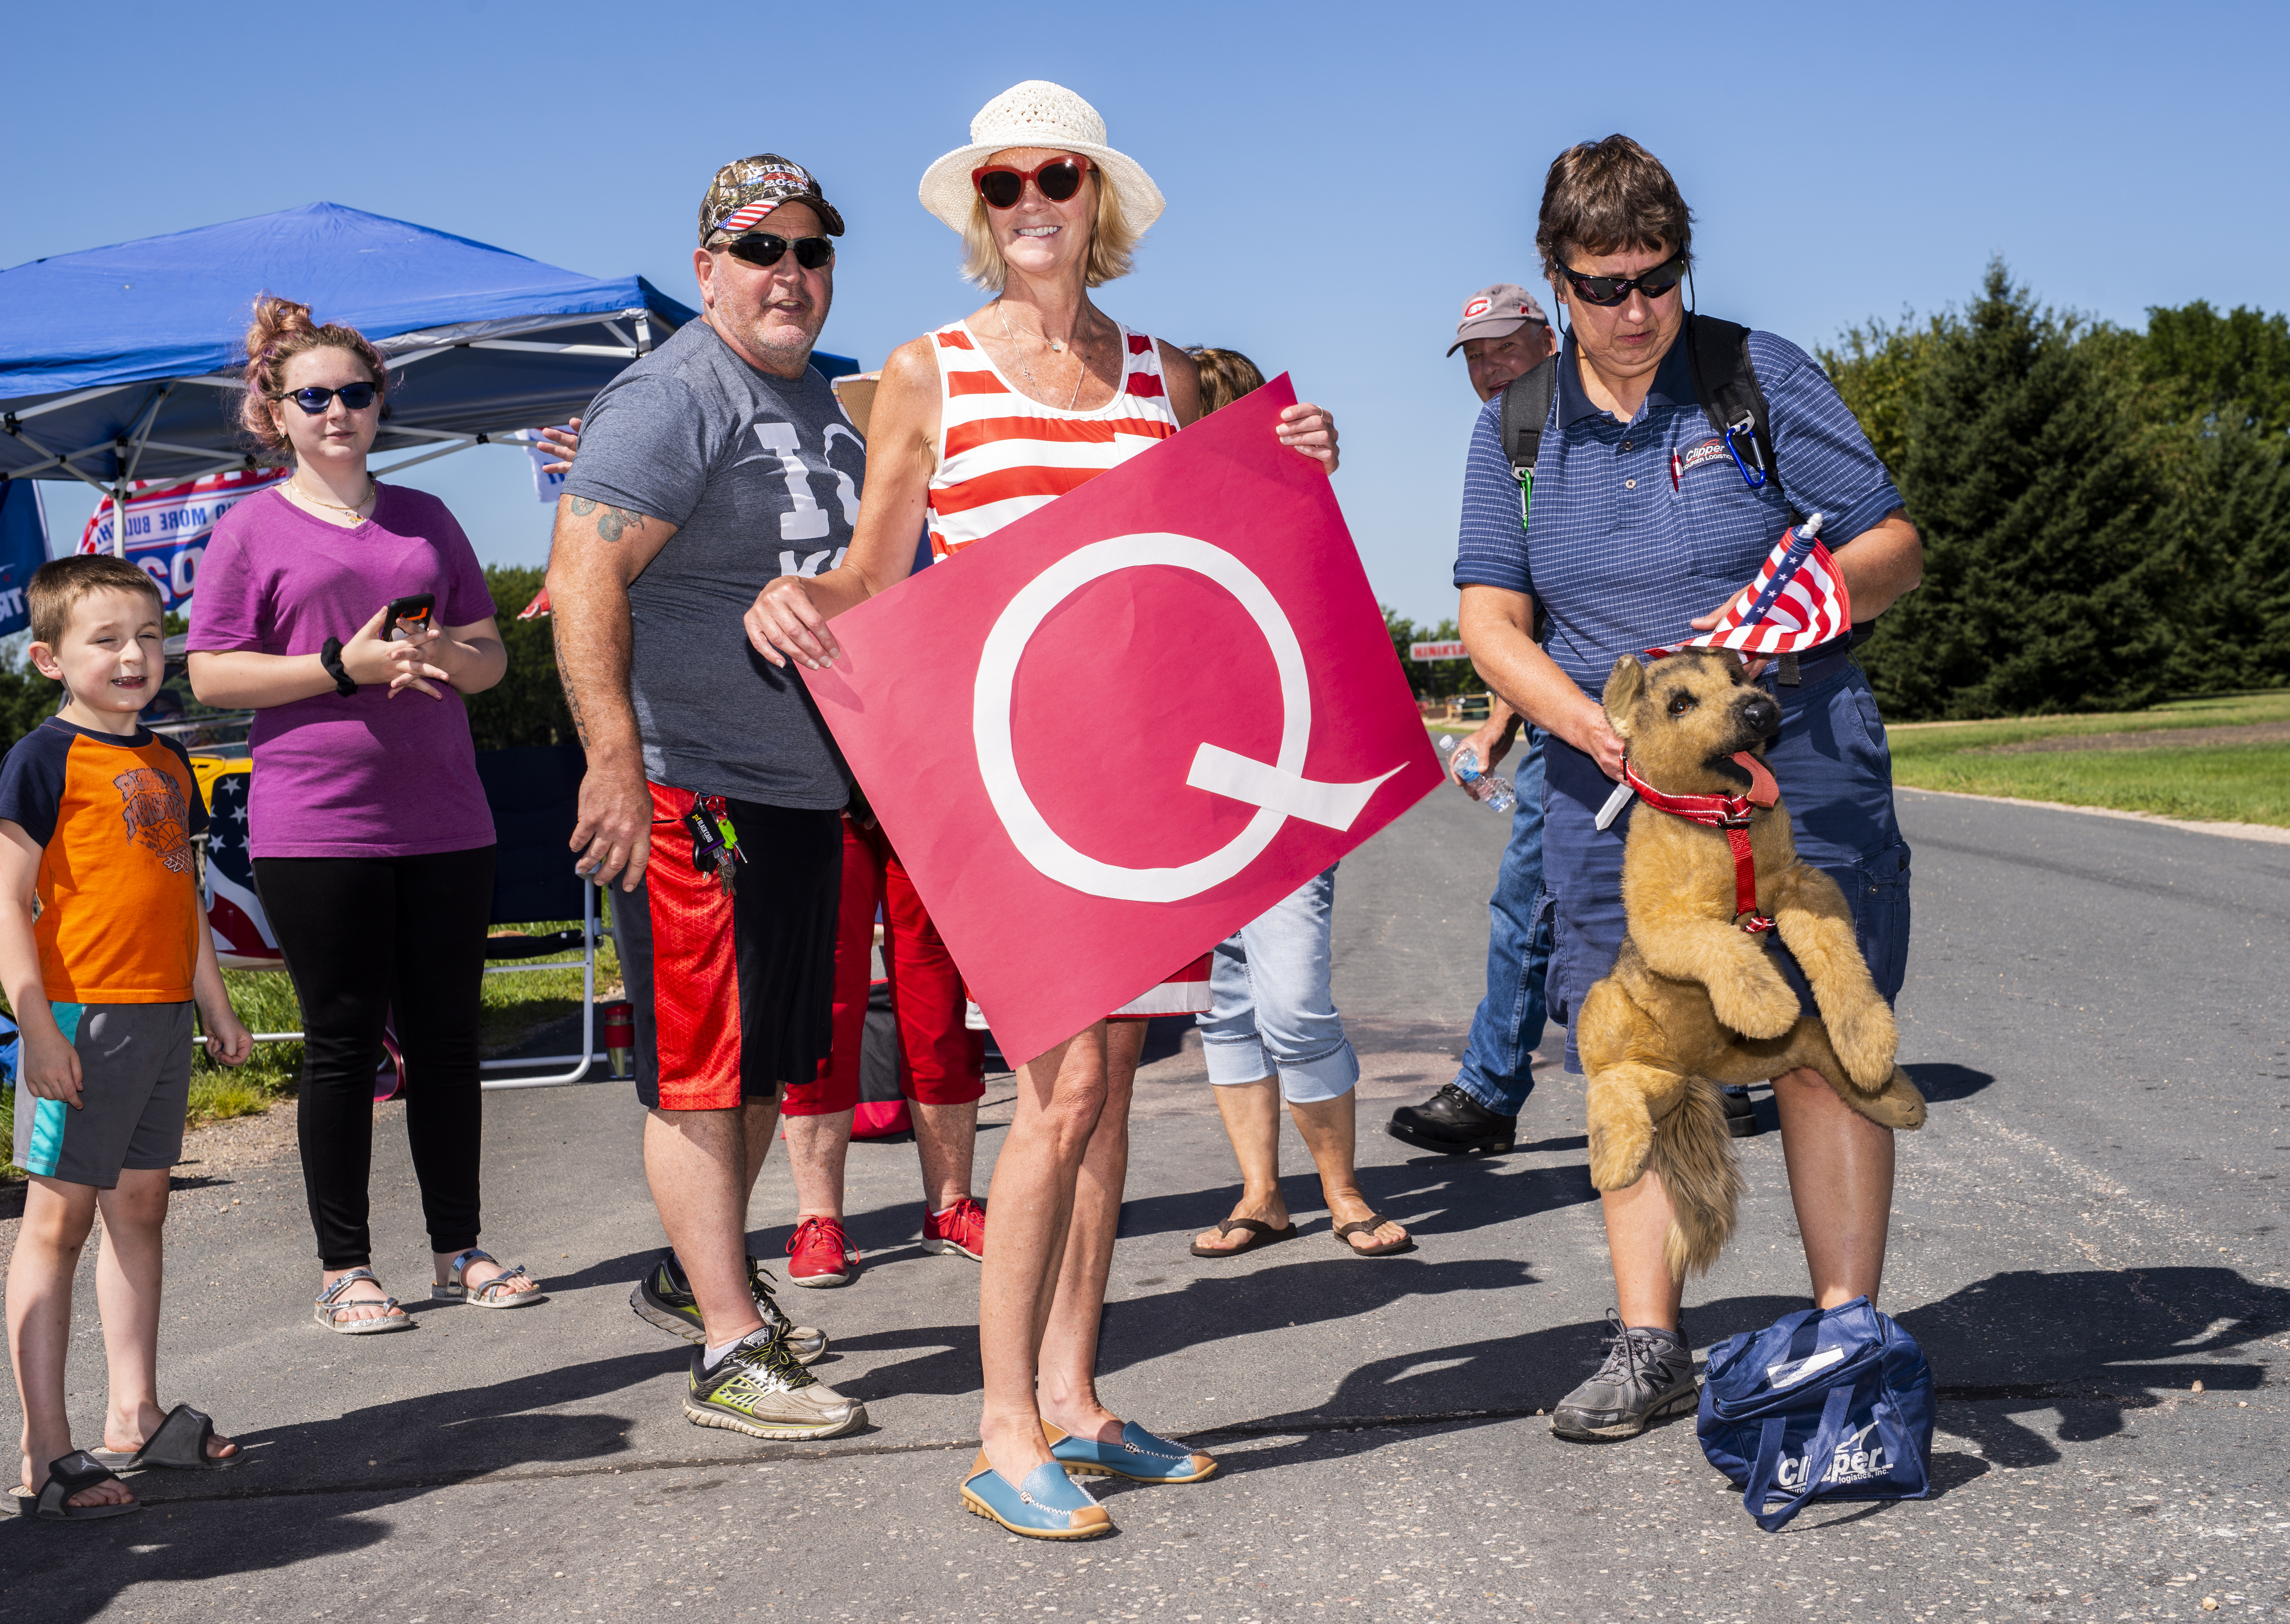 A person holding a sign with a large letter Q stands with a group of people at a roadside.